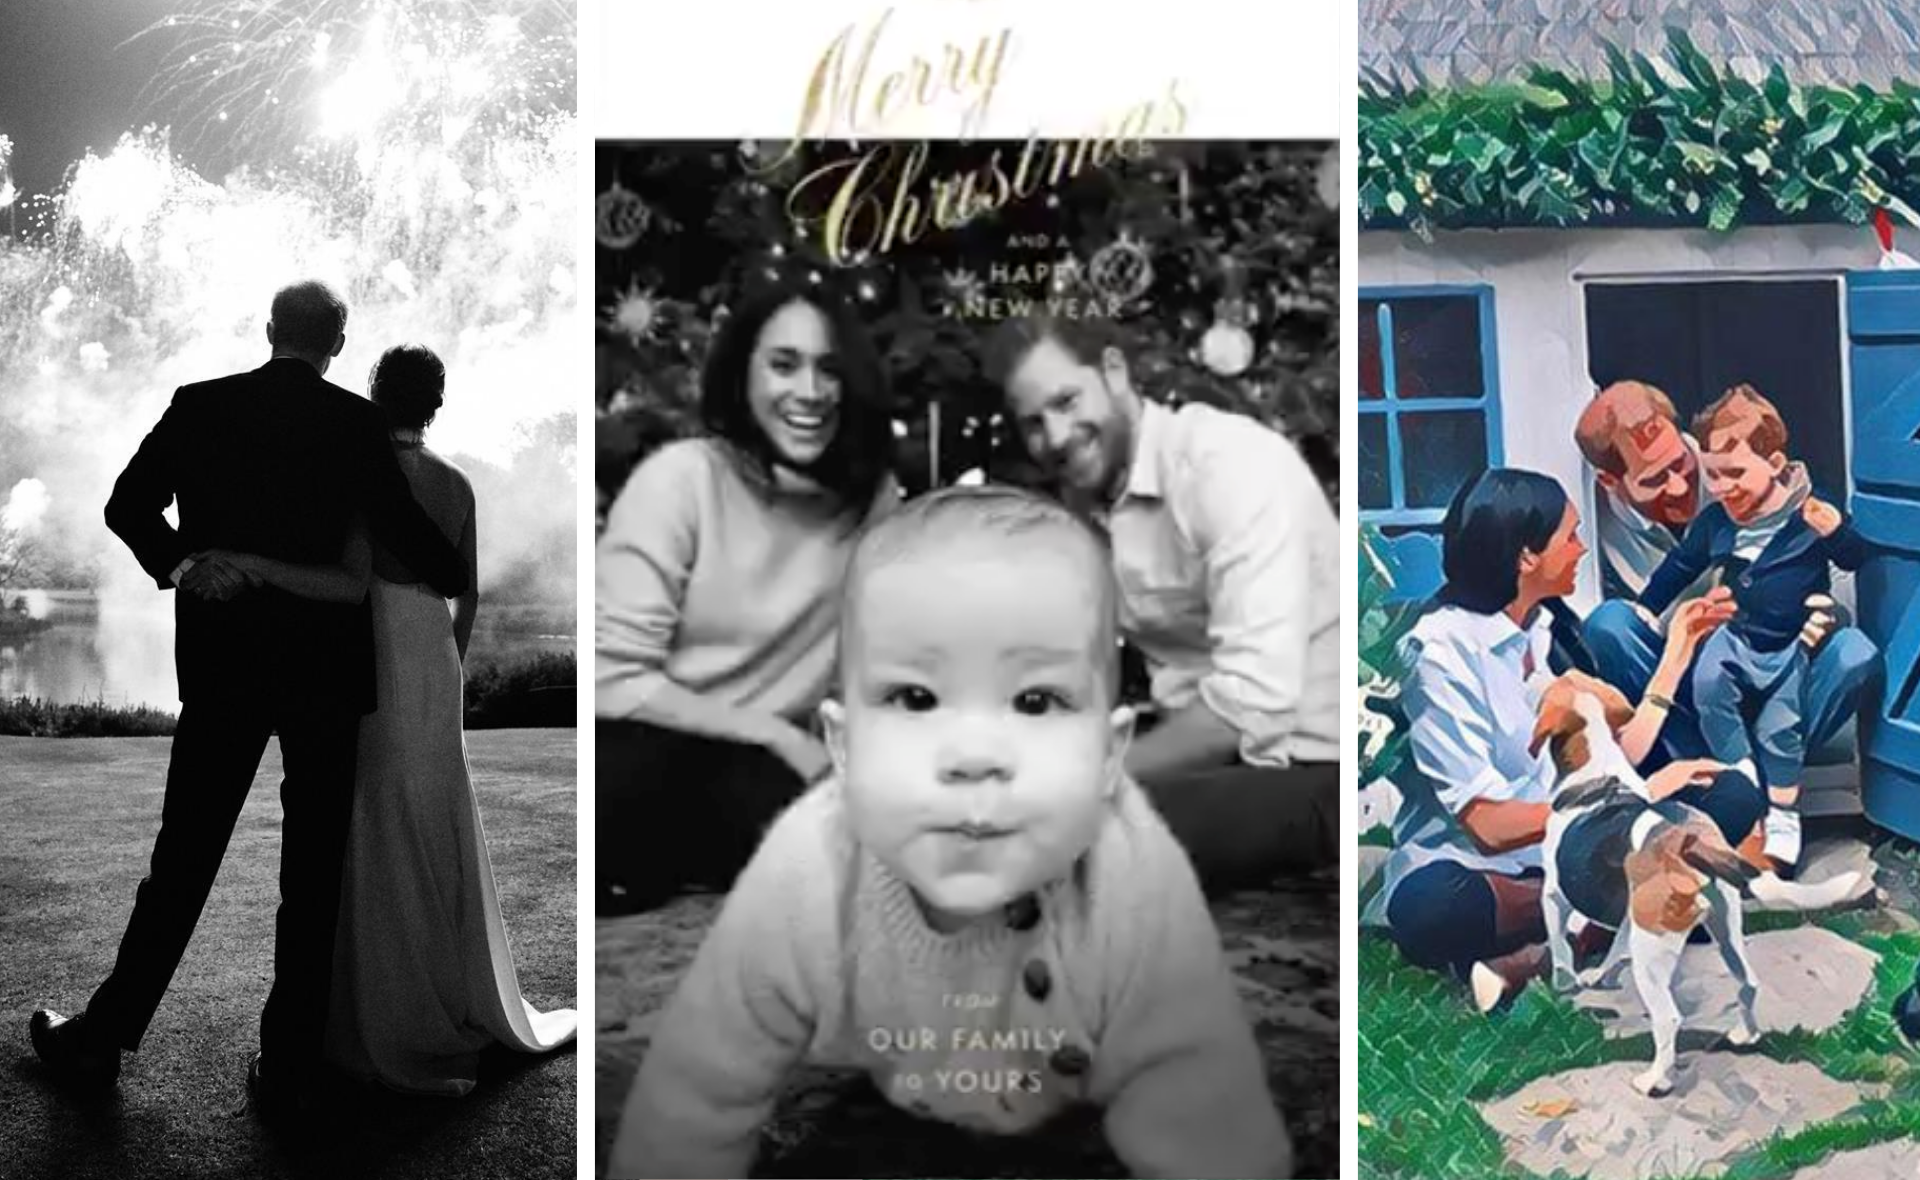 Harry and Meghan’s Christmas cards all have one telling feature in common, and it tells us a lot about them